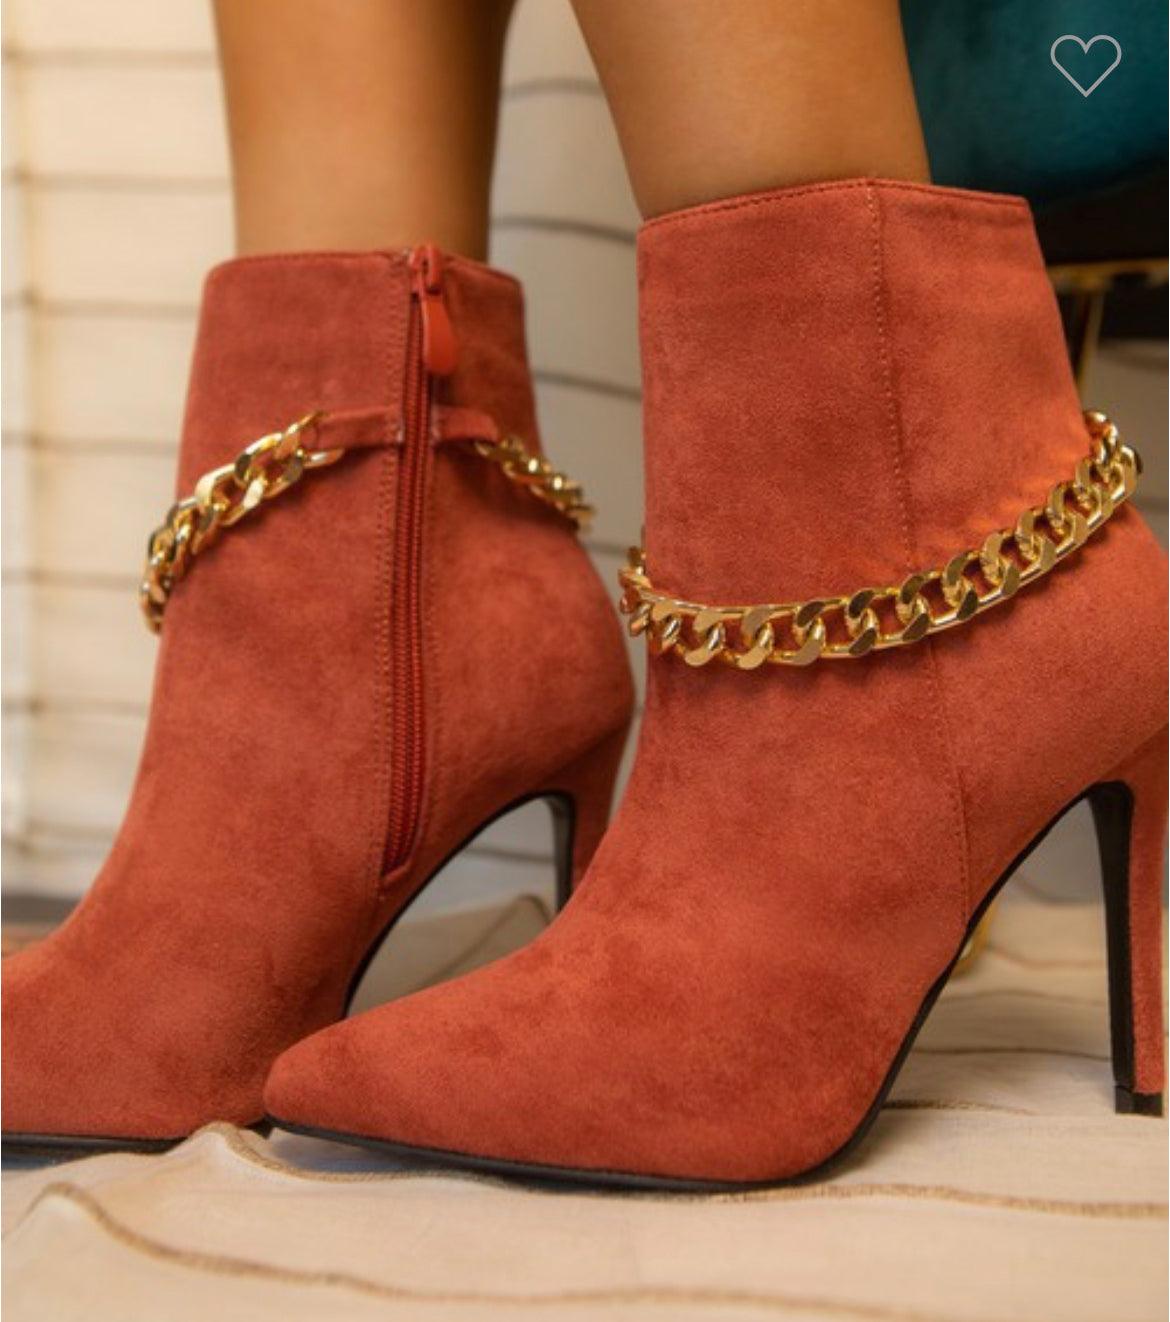 suede stiletto booties with chain